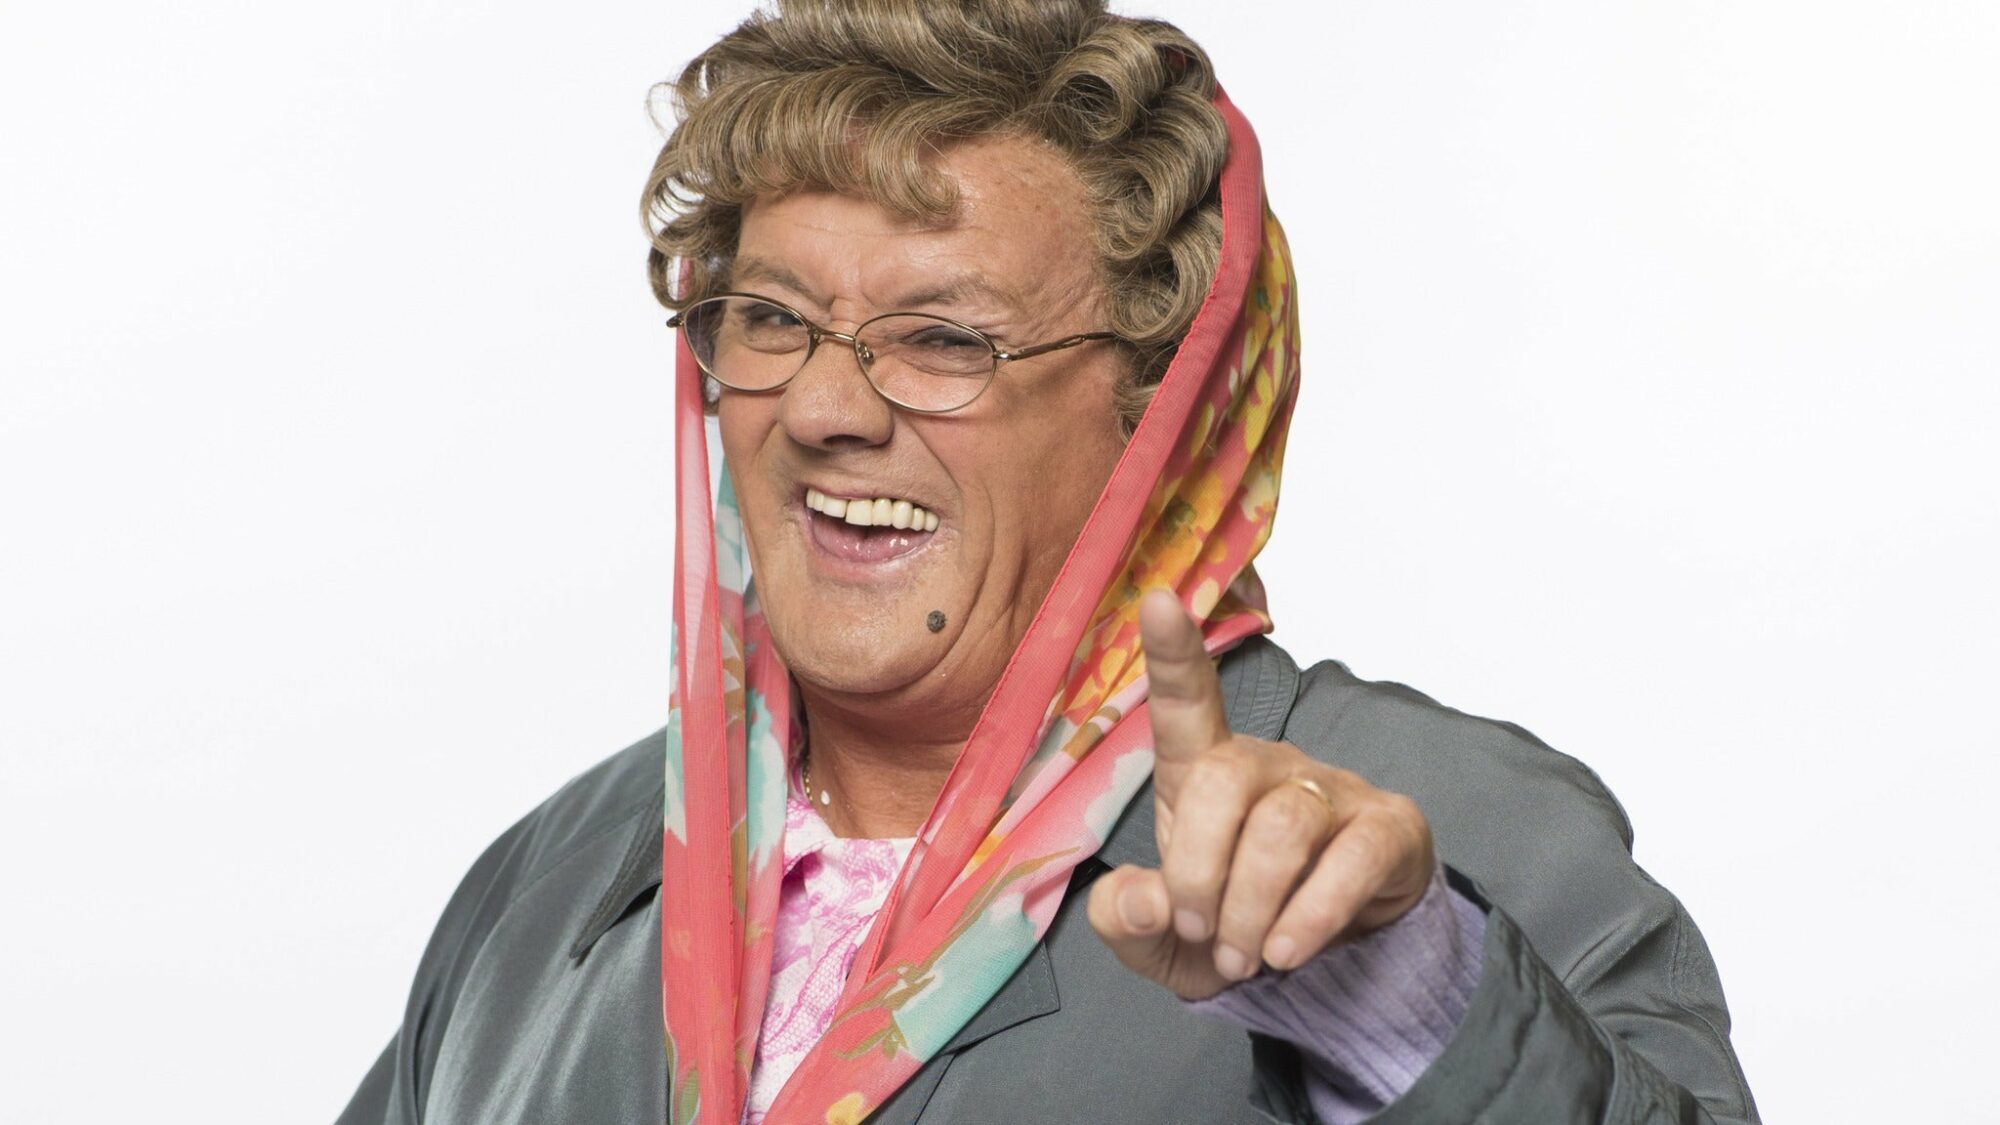 Image name Mrs Browns Boys Mrs Brown Rides Again at Bonus Arena Hull Hull the 1 image from the post Mrs Brown's Boys - Mrs Brown Rides Again at Connexin Live, Hull in Yorkshire.com.